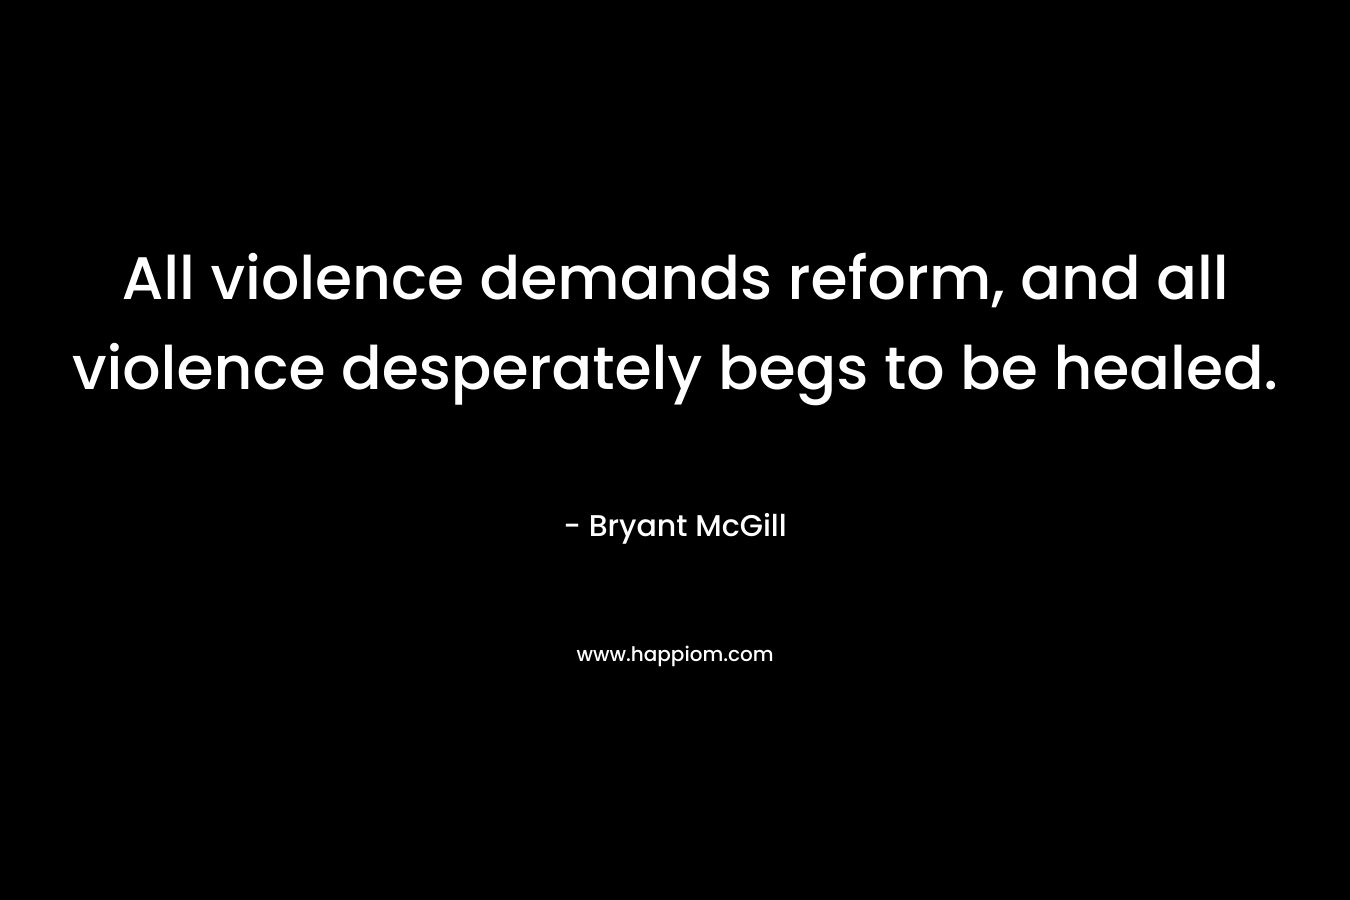 All violence demands reform, and all violence desperately begs to be healed. – Bryant McGill